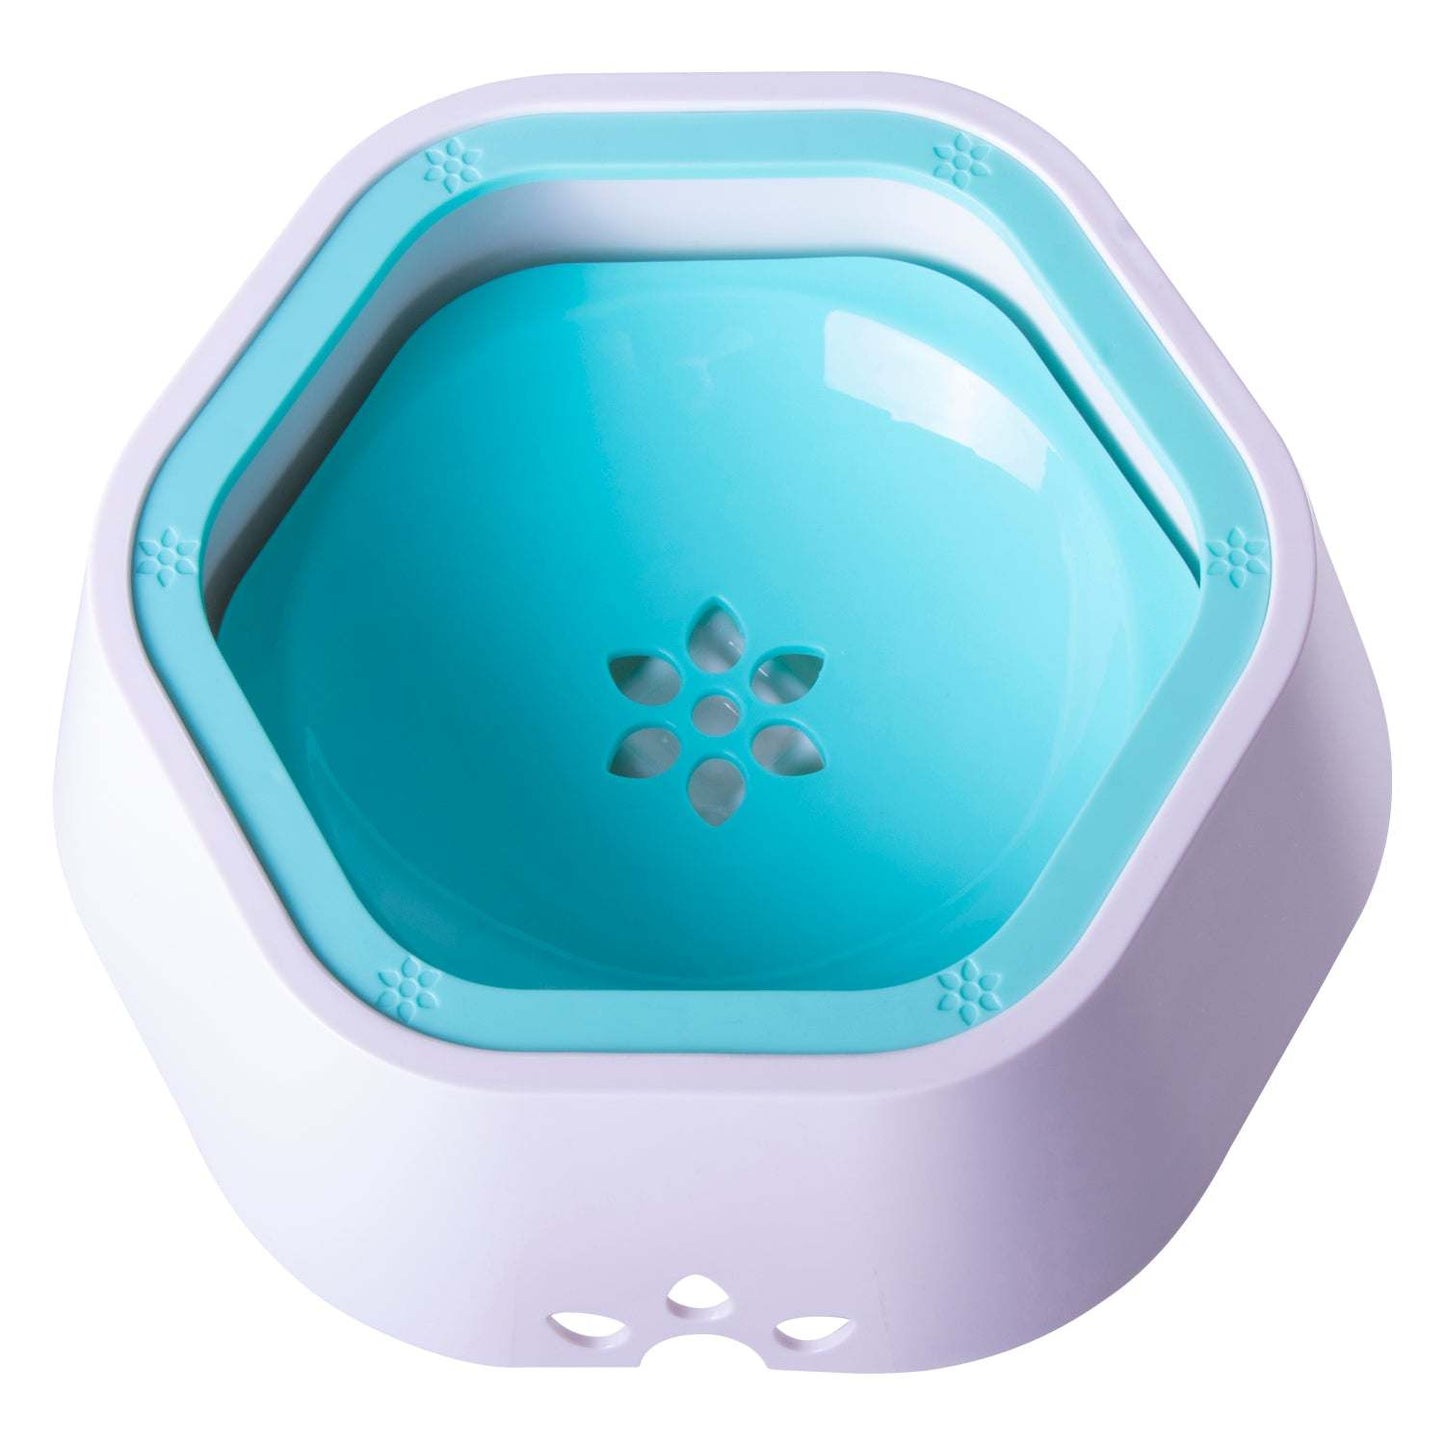 2-in-1 Food and Anti-Spill Water Pet Bowl